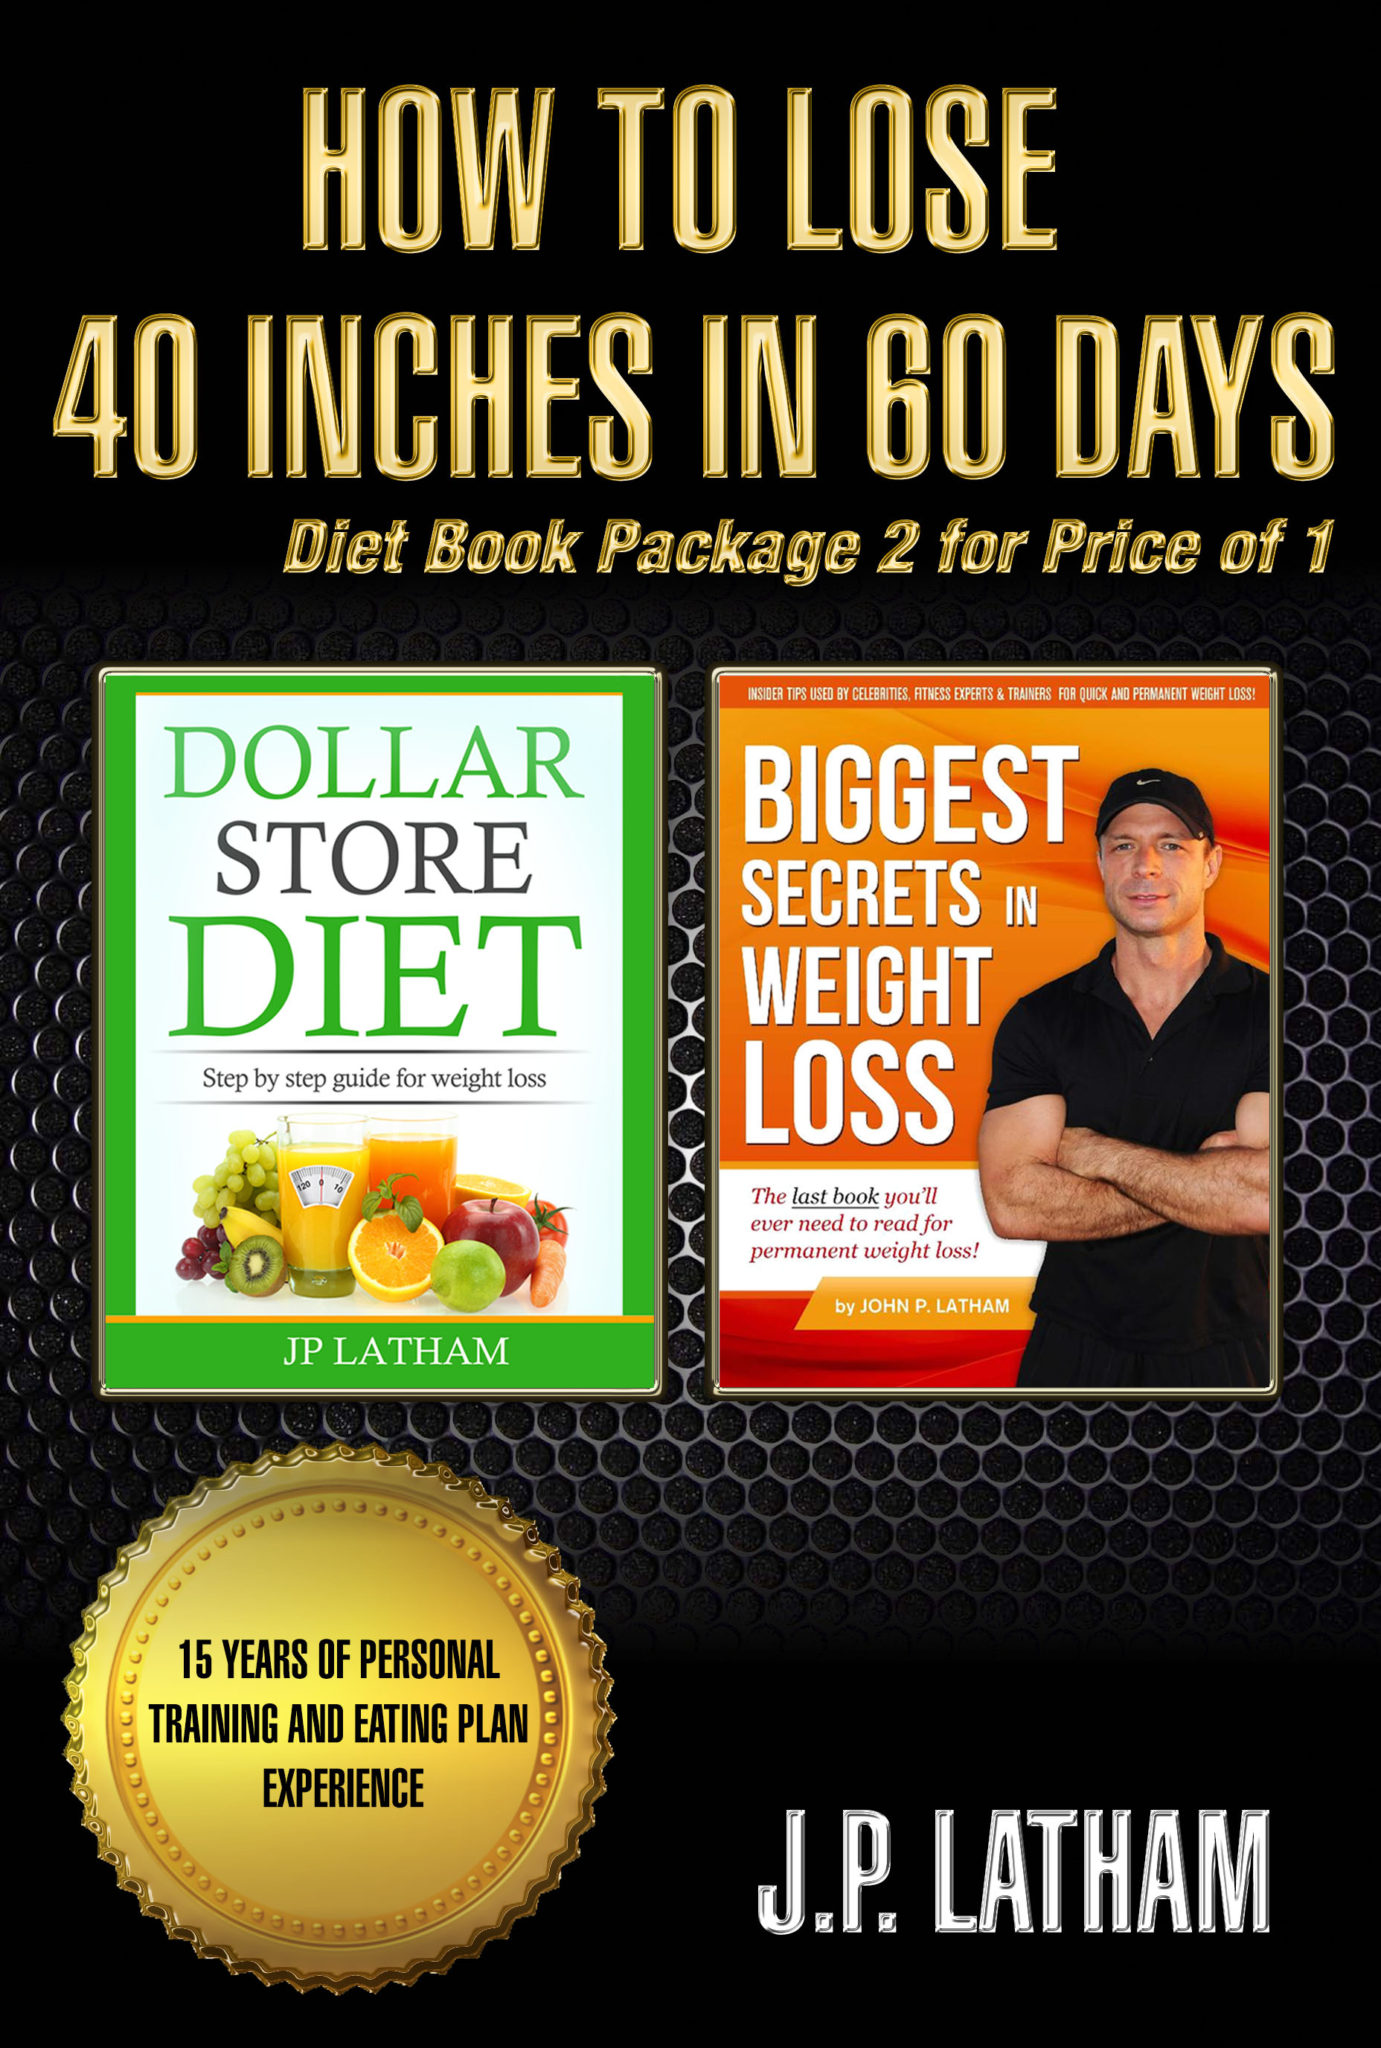 How to lose 40 inches in 60 days 2 for 1  diet book by JP Latham